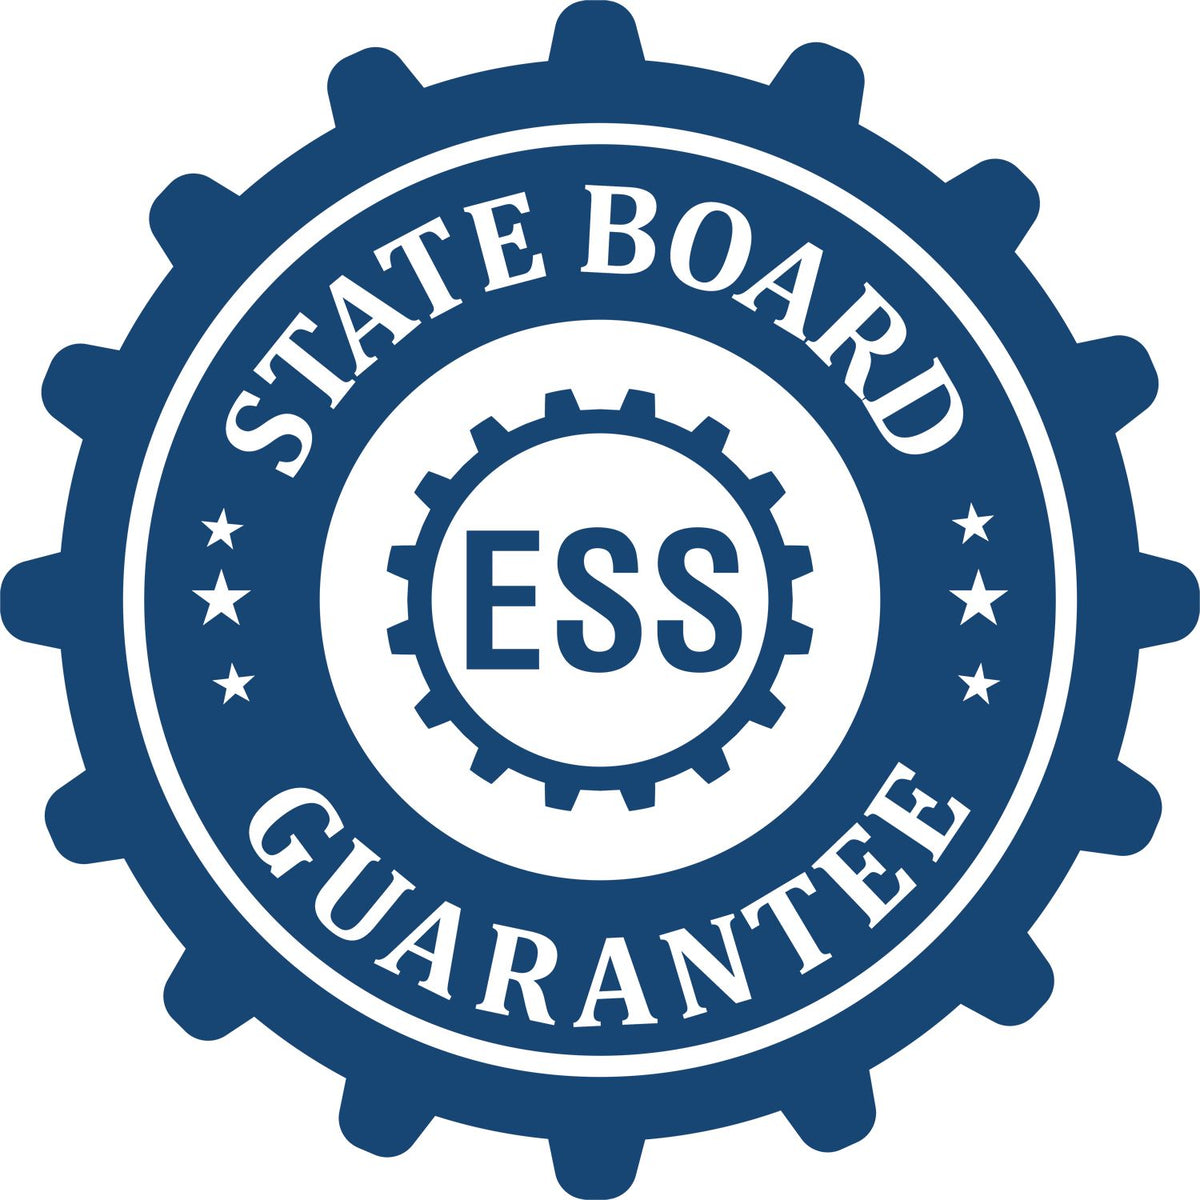 An emblem in a gear shape illustrating a state board guarantee for the Digital Washington PE Stamp and Electronic Seal for Washington Engineer product.